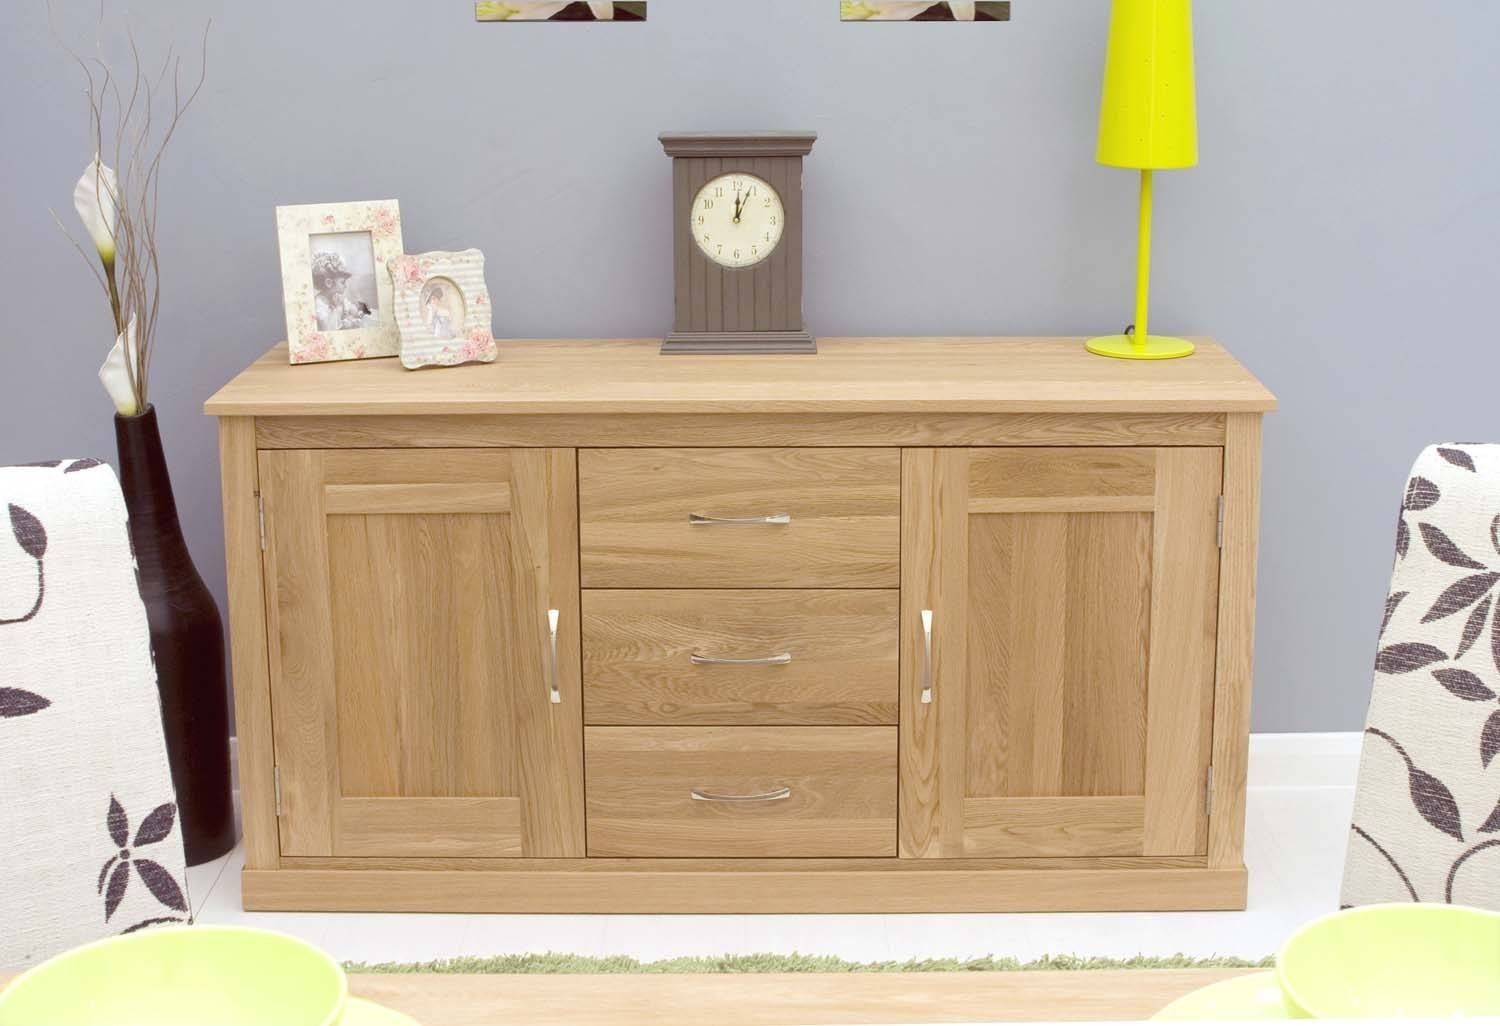 Modern Light Oak Sideboards And Console Table | Solid Oak Intended For Most Up To Date Cheap Oak Sideboards (View 5 of 15)